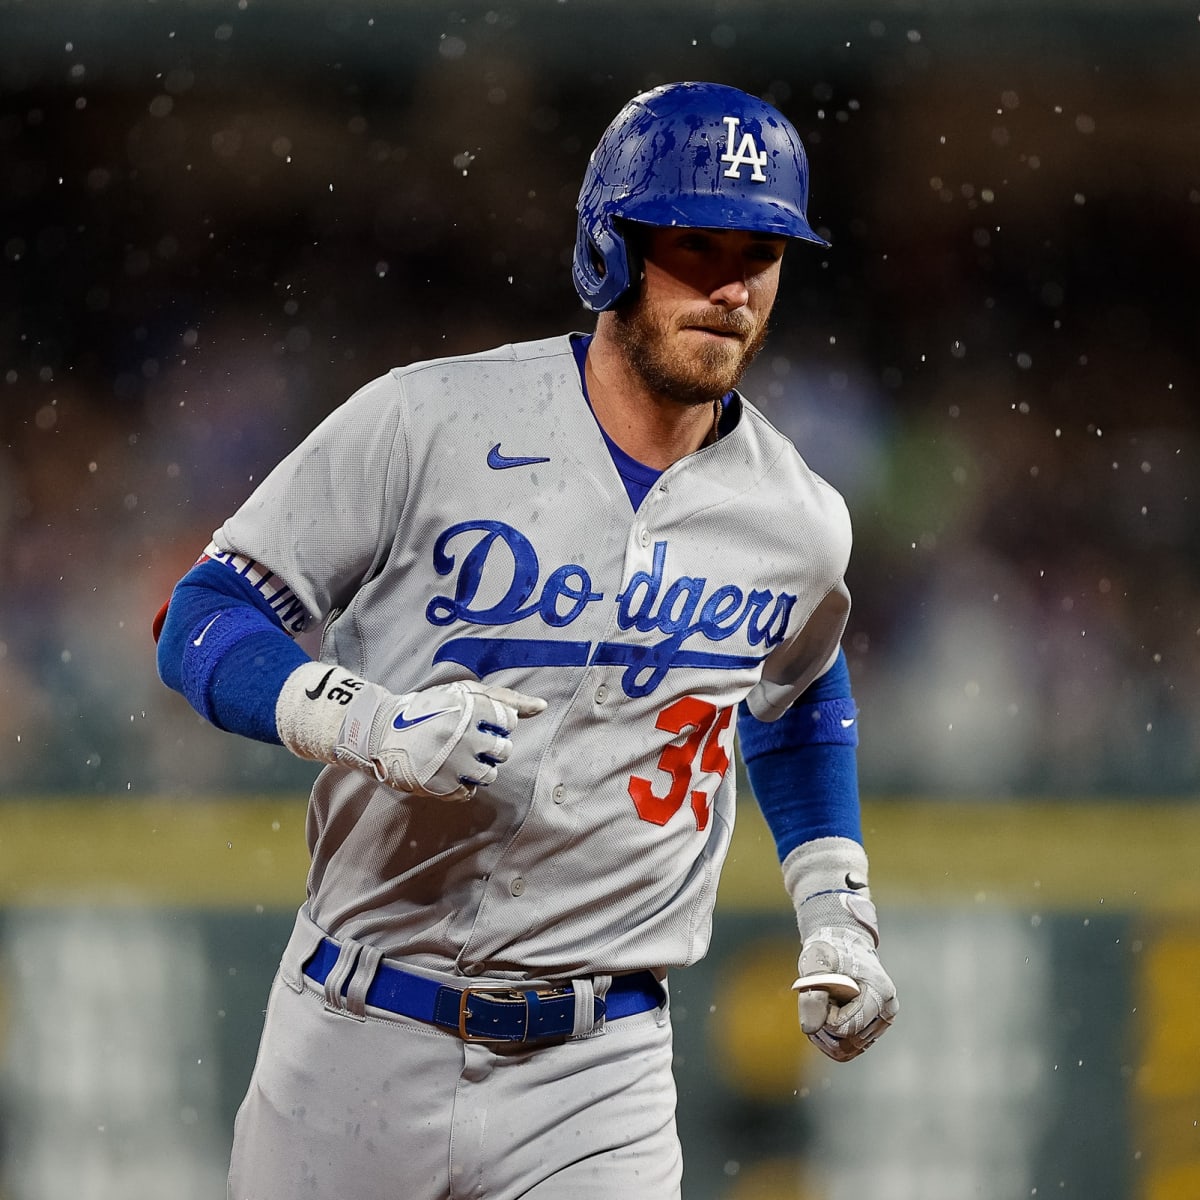 Dodgers News and Notes – Bellinger Player of the Week, Dodgers